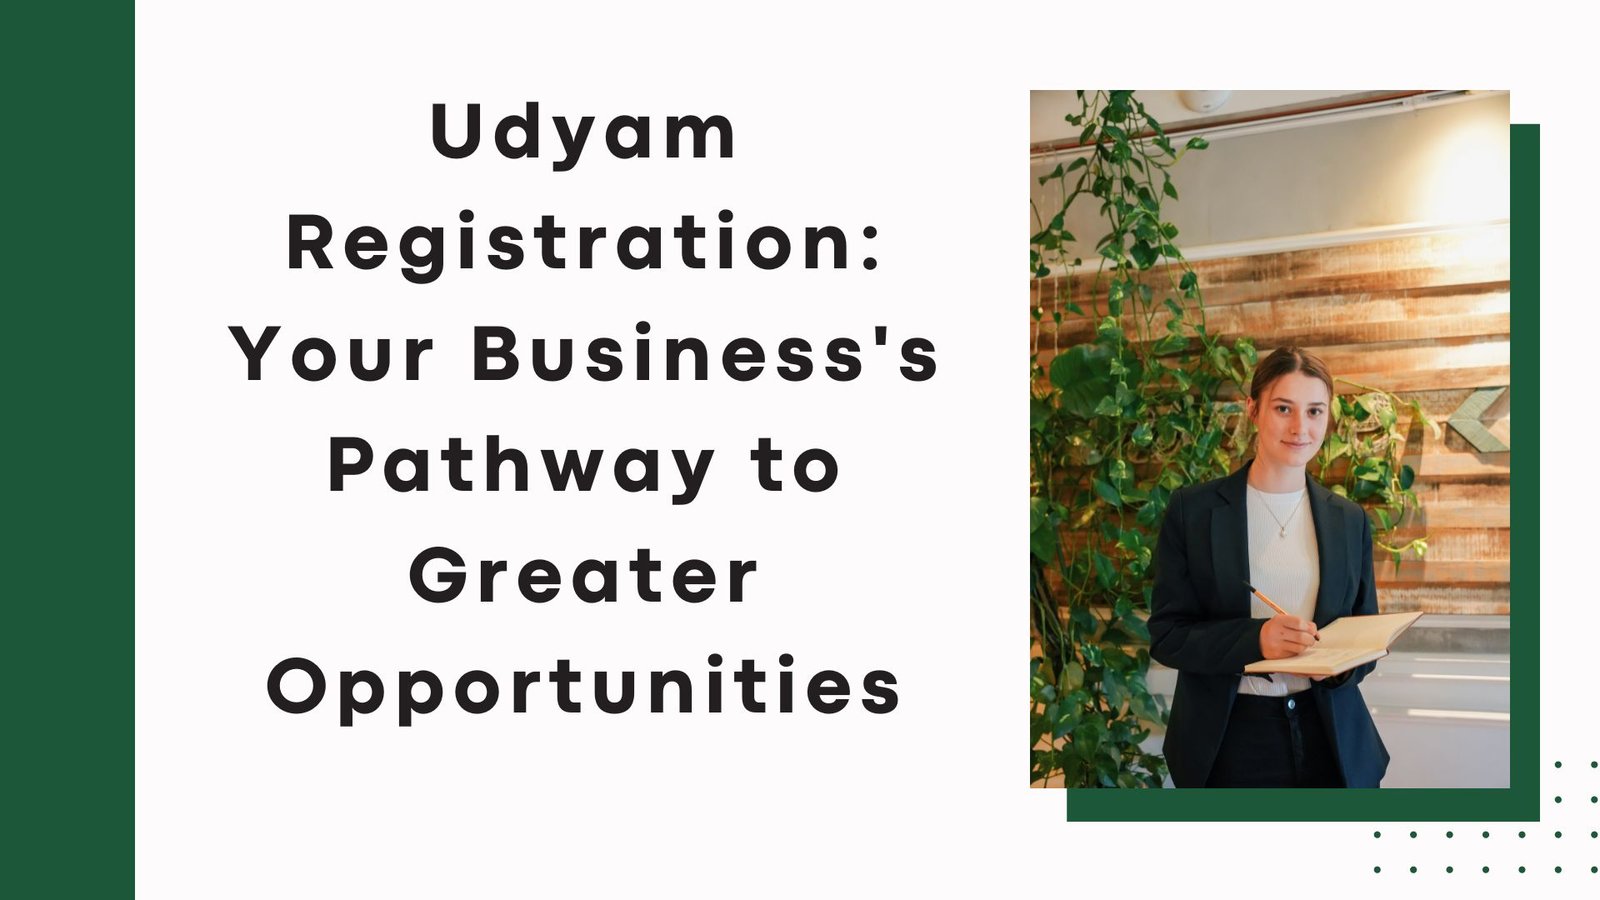 Udyam Registration Your Business's Pathway to Greater Opportunities